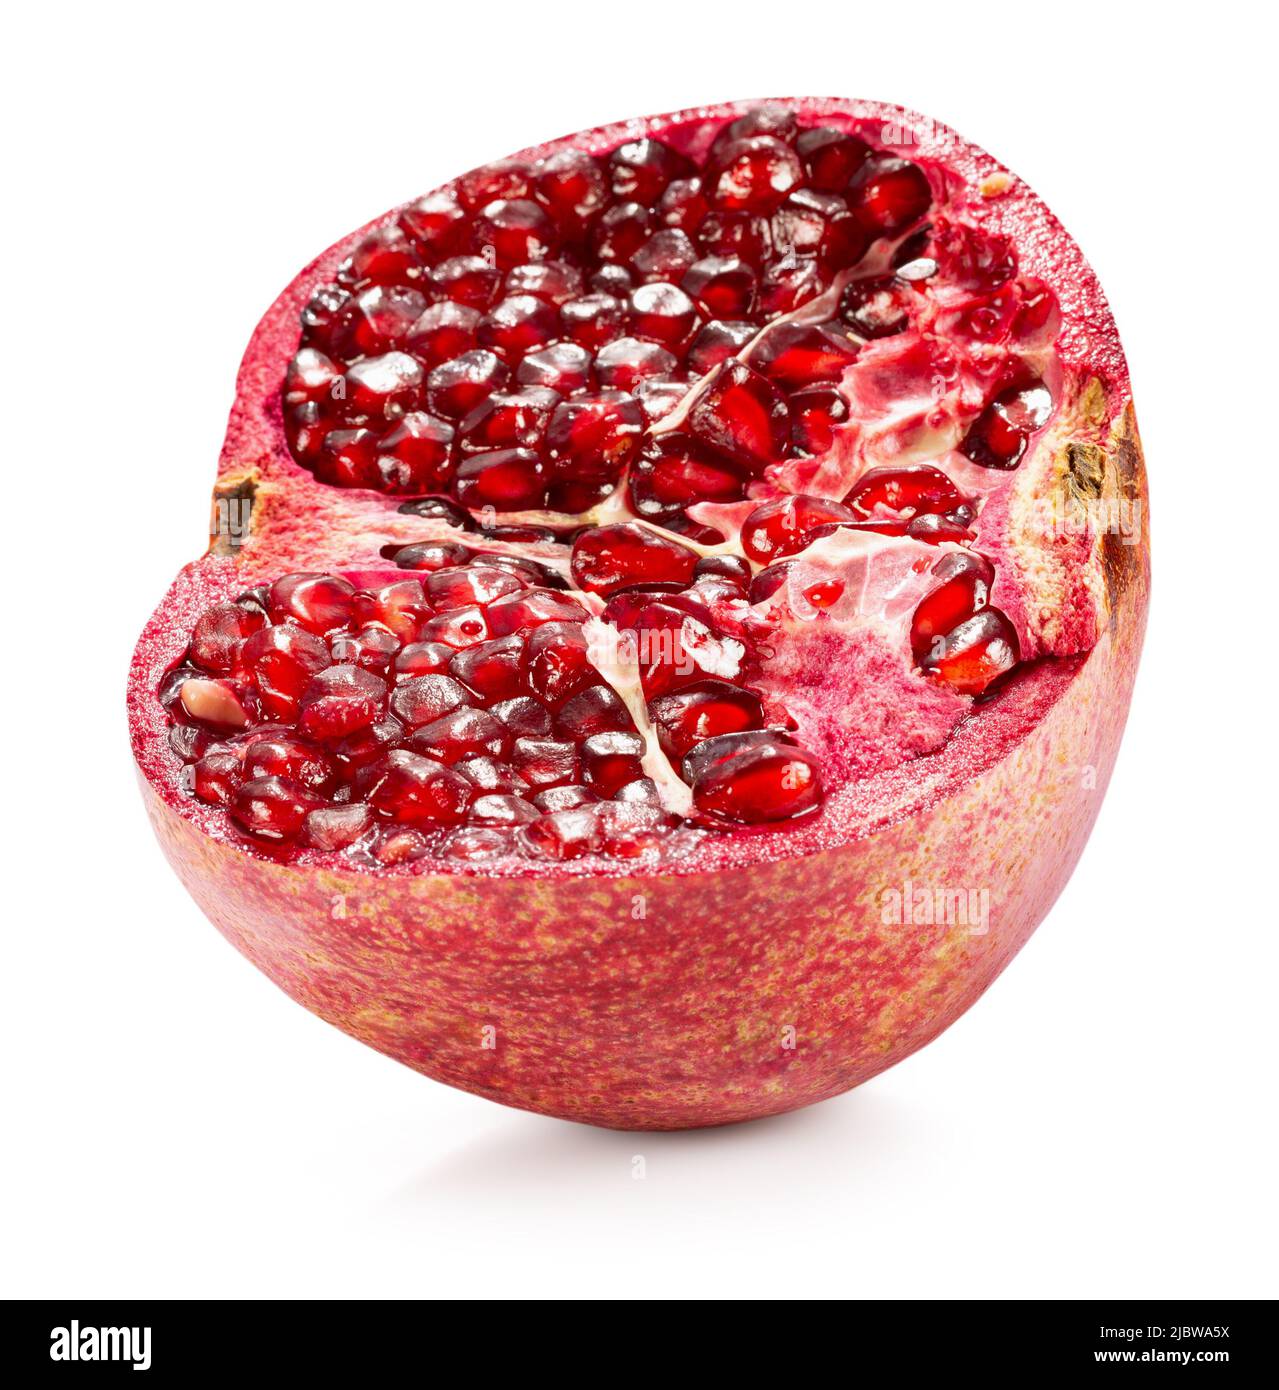 half of pomegranate with red seeds isolated on a white background with clipping path. Stock Photo